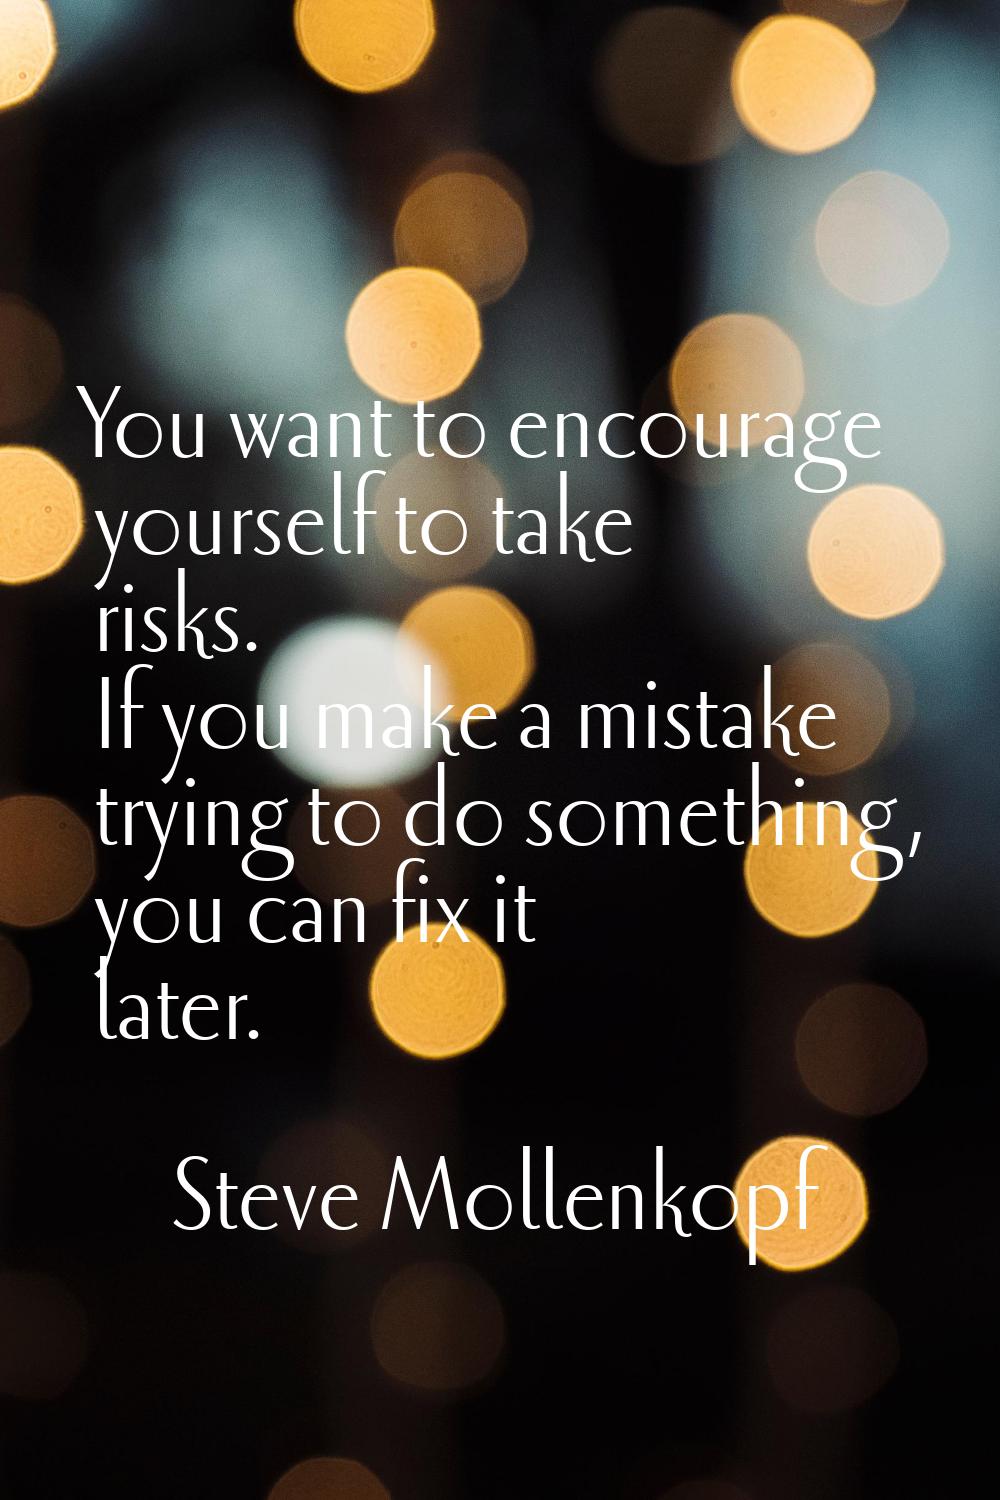 You want to encourage yourself to take risks. If you make a mistake trying to do something, you can